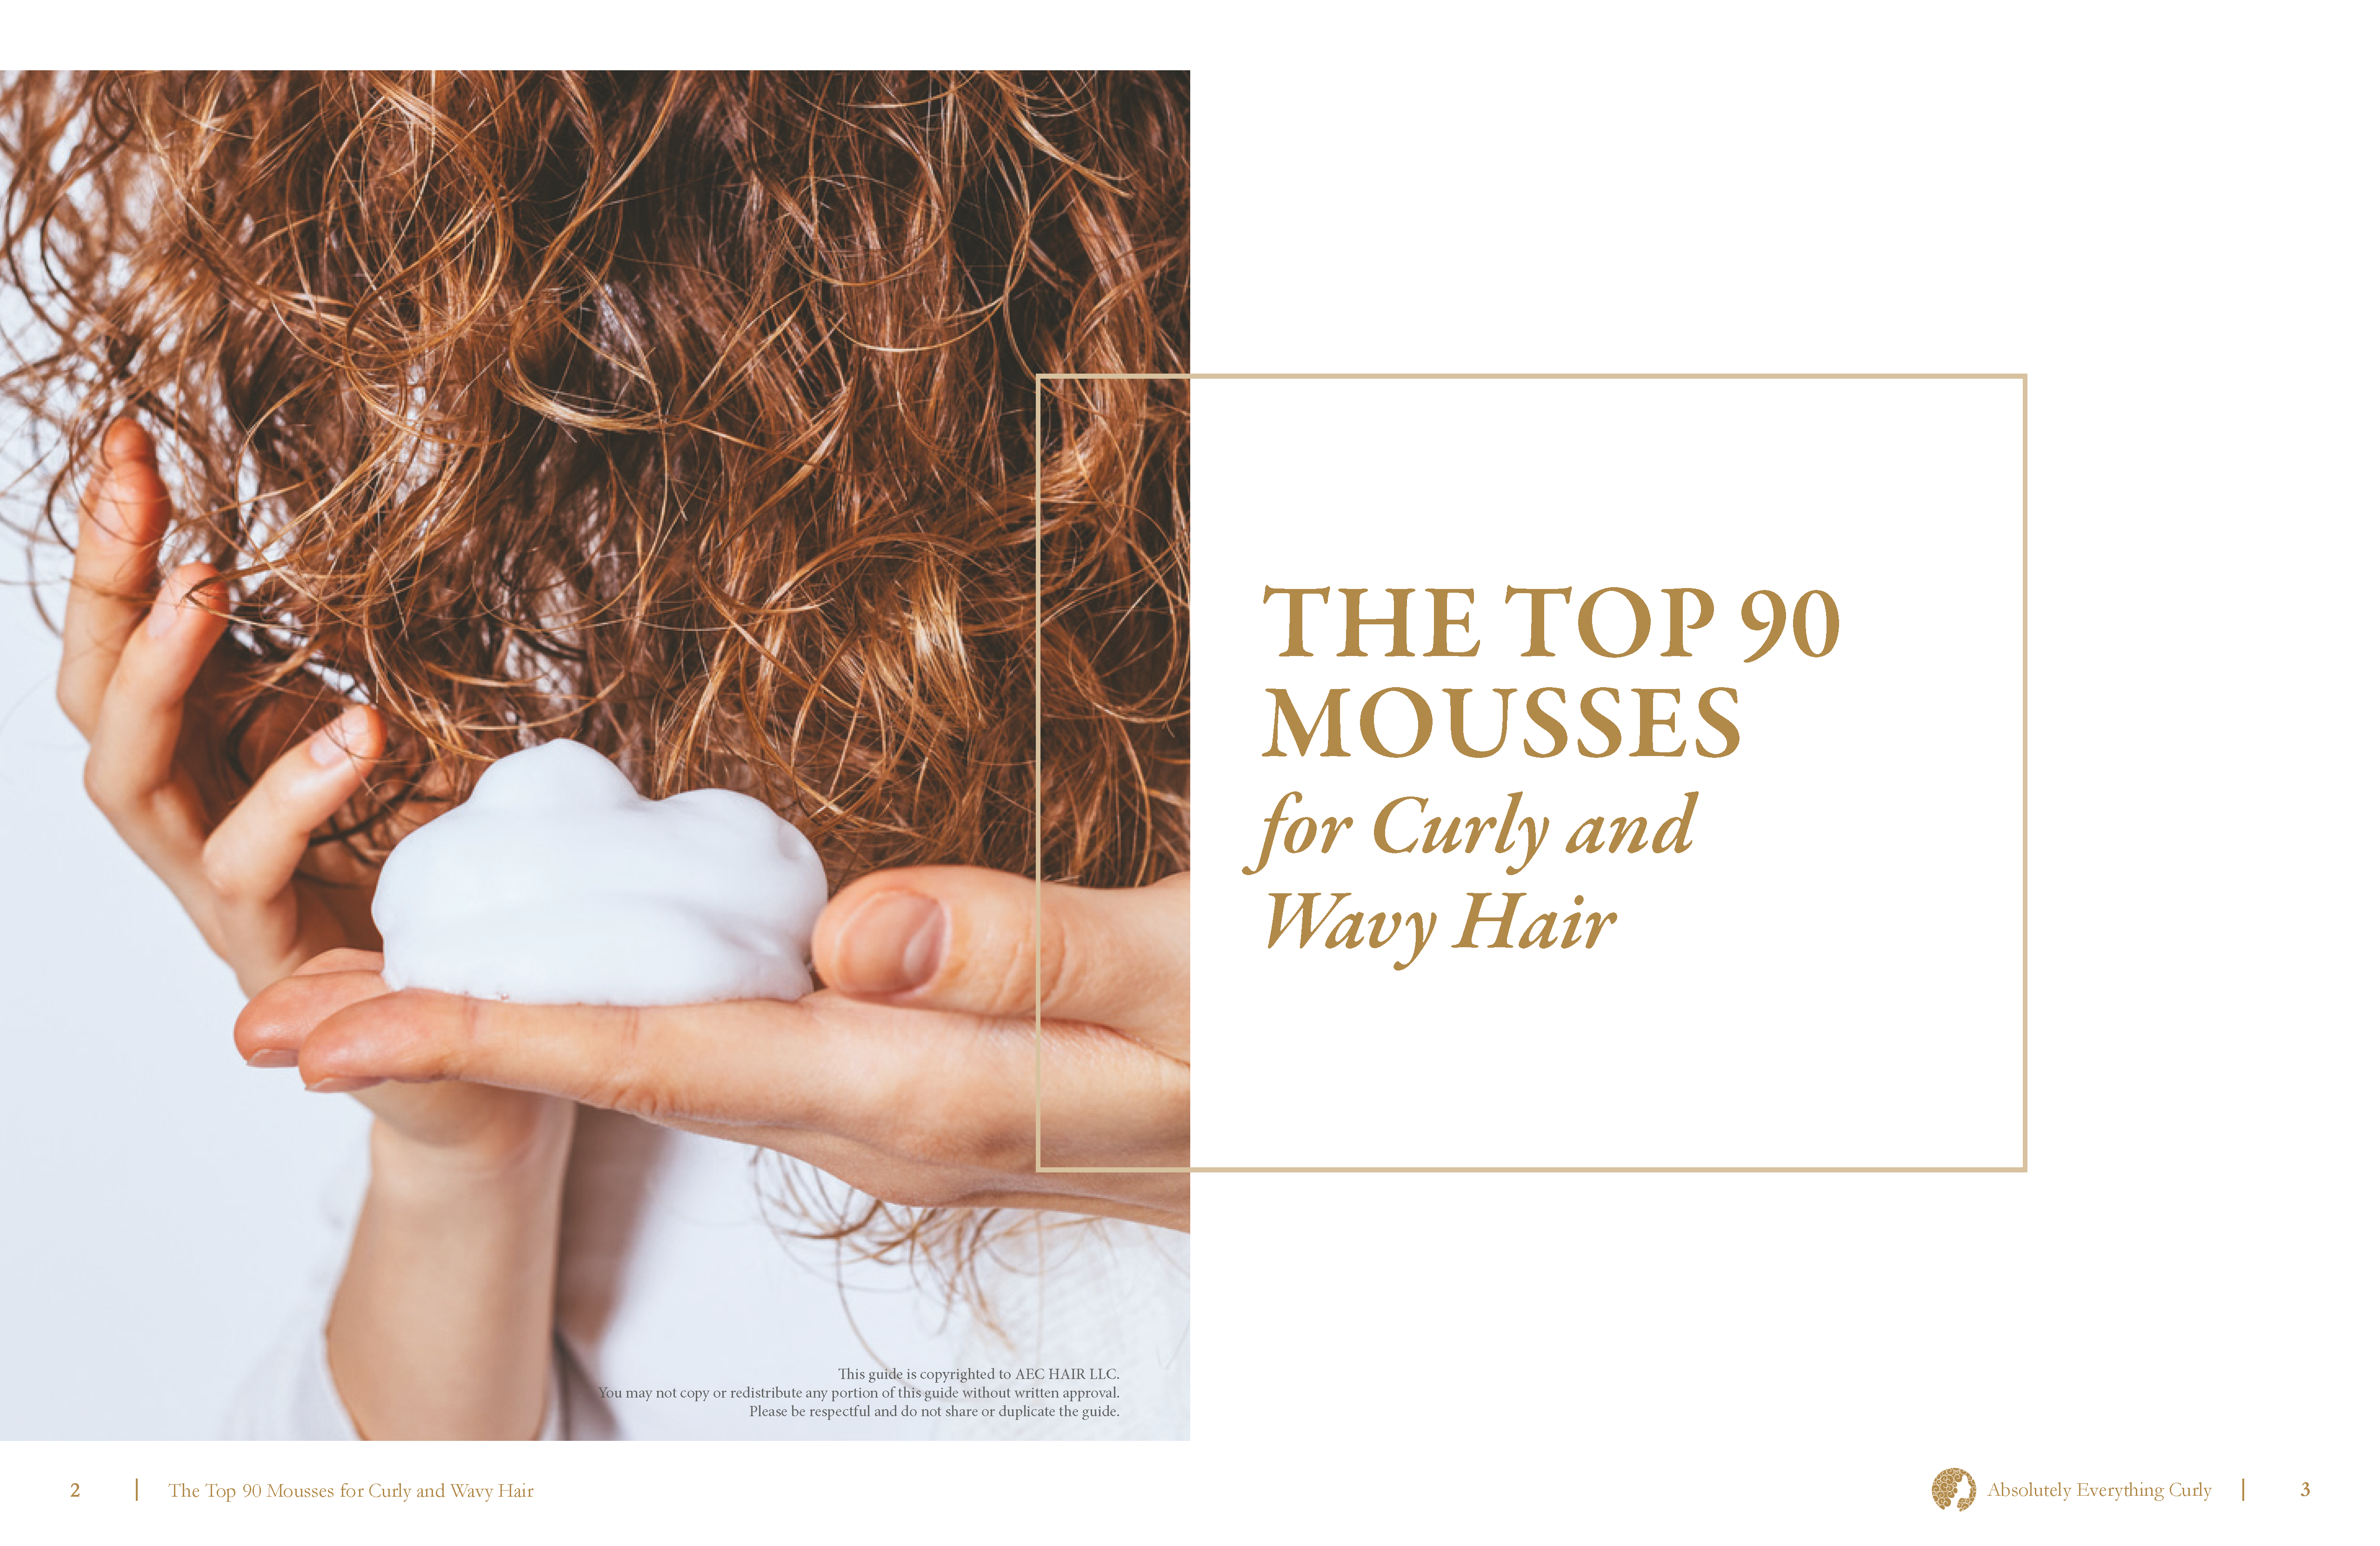 Curly Hair Mousse - Ultimate Guide: Top 90 Mousses for Curly and Wavy Hair